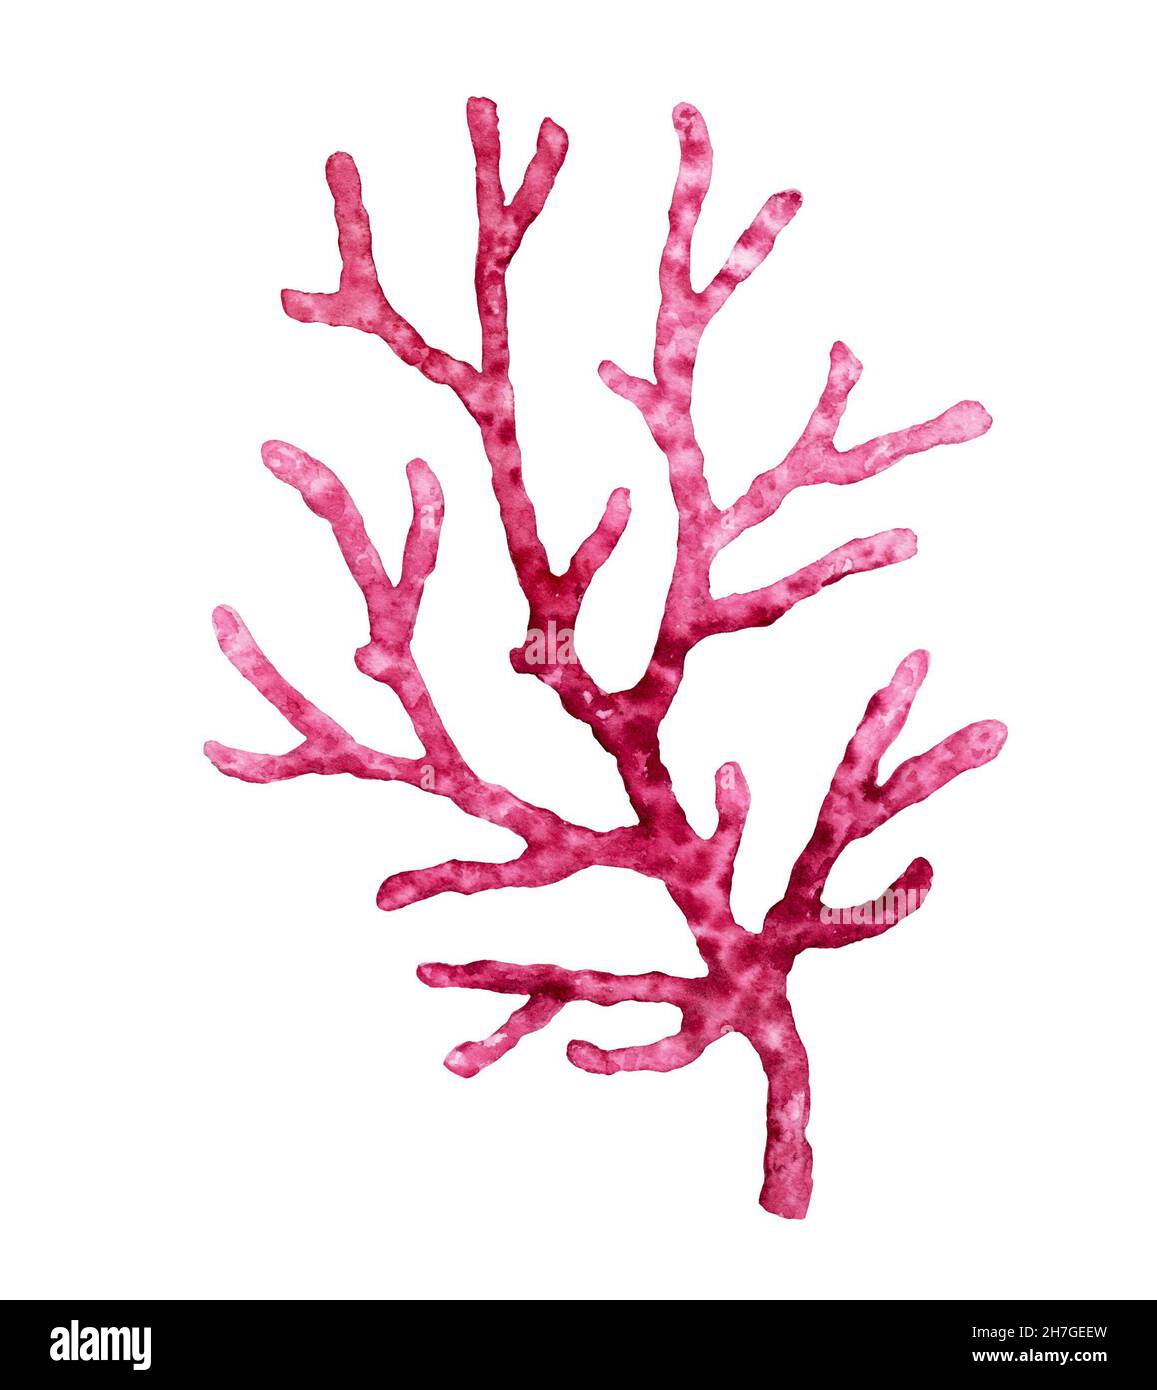 Watercolor red coral. Transparent sea plant isolated on white. Realistic scientific illustration. Hand painted underwater design  Stock Photo